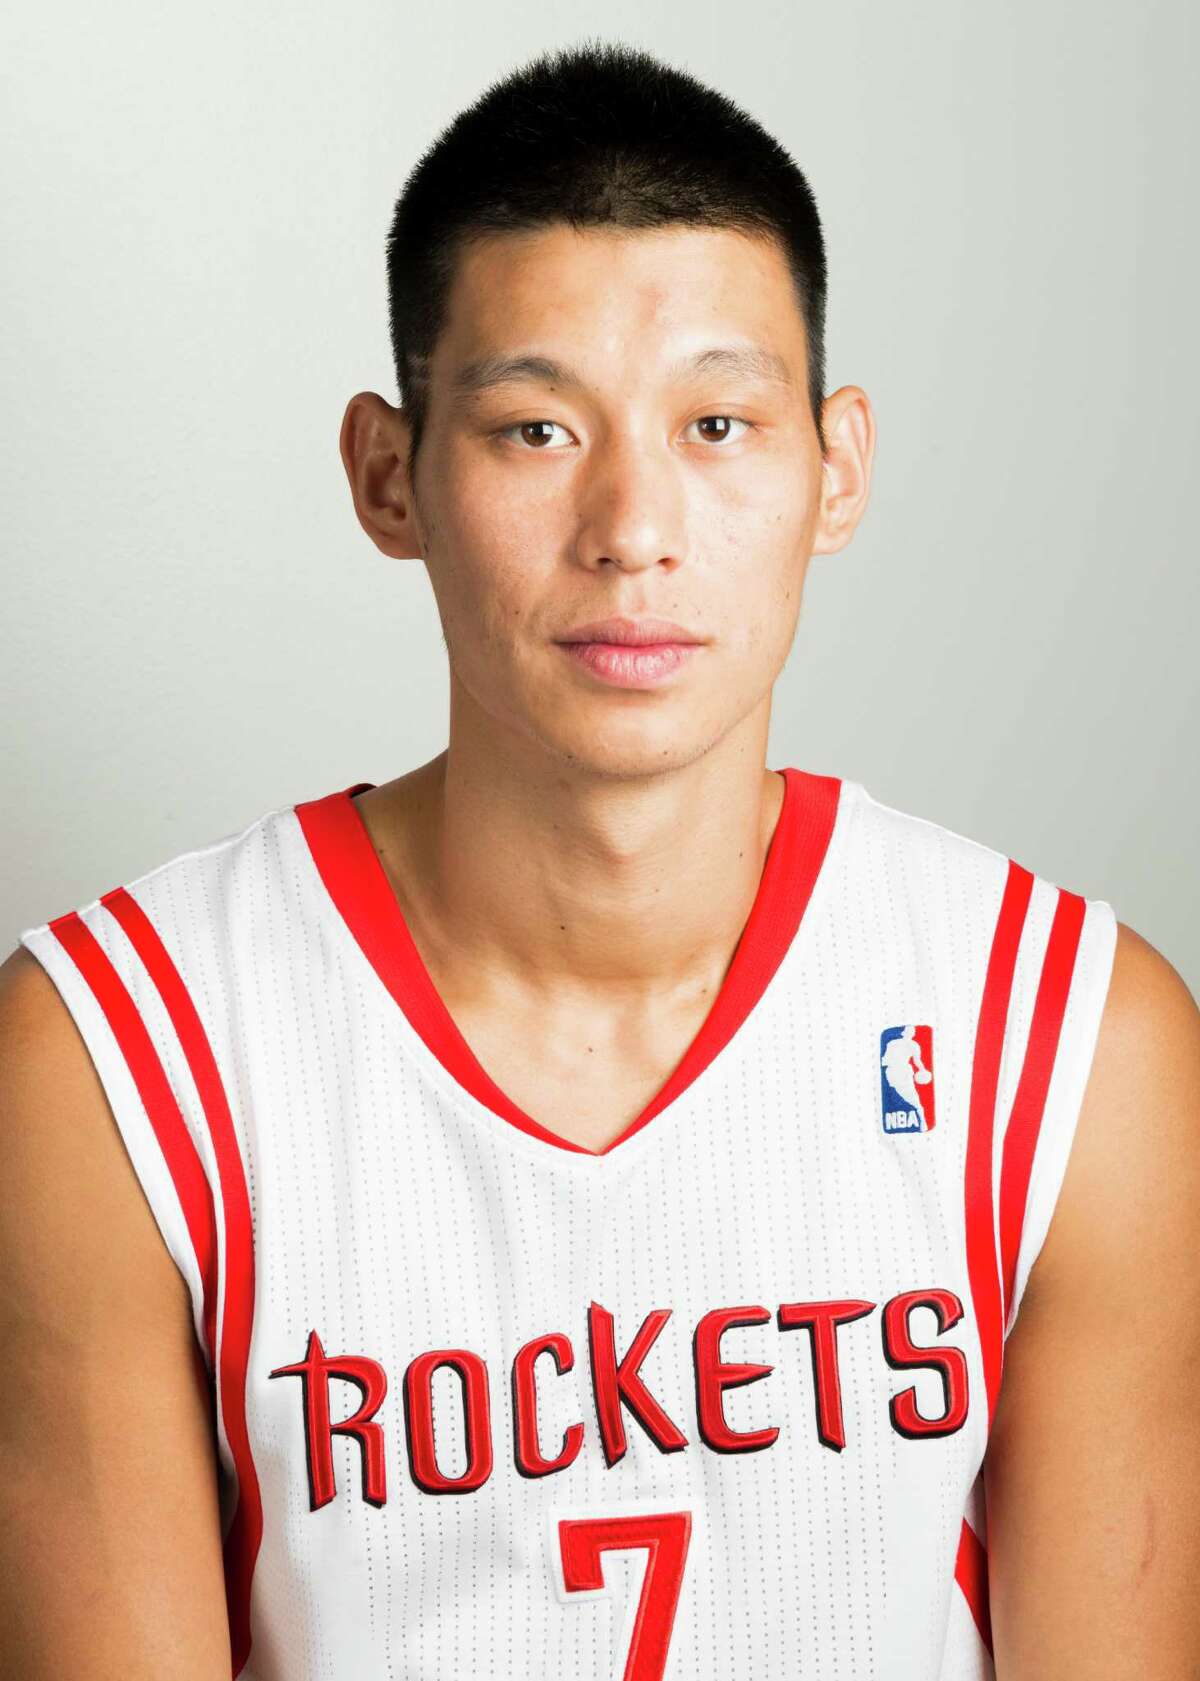 Rockets Use Lin's No. 7 as Anthony Lure - The New York Times